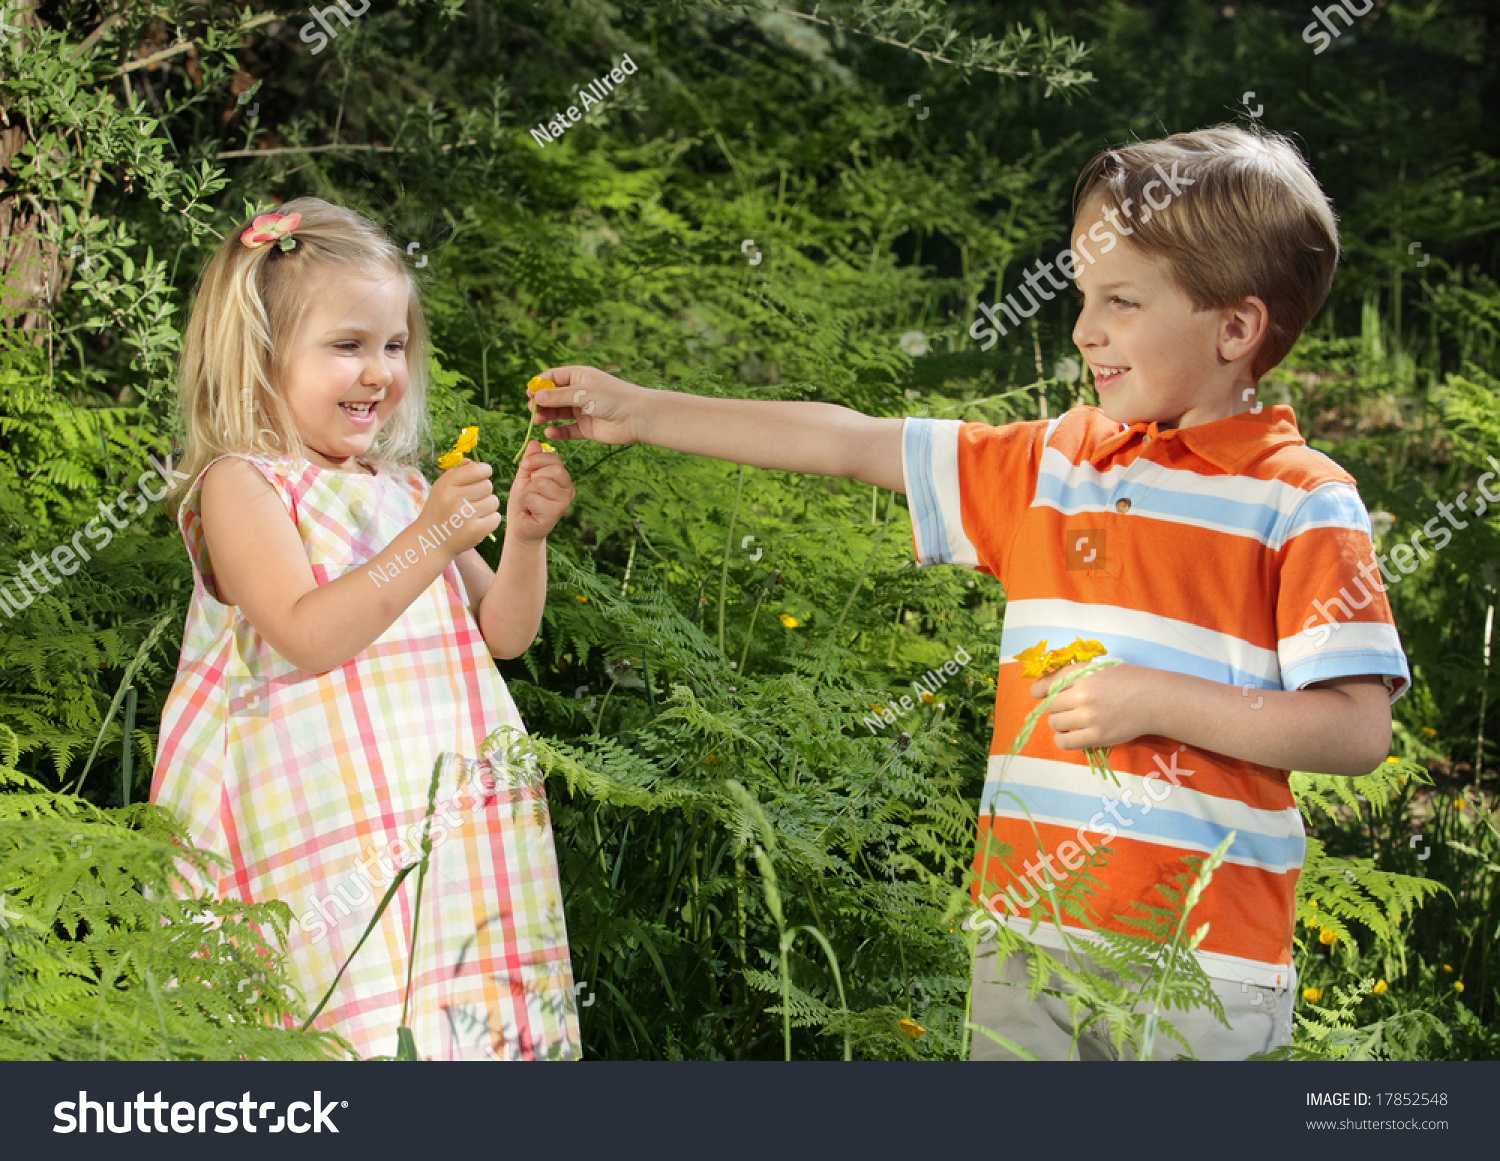 Little Girl And Boy Playing With Wildflowers In Nature Stock Photo 17852548 : Shutterstock